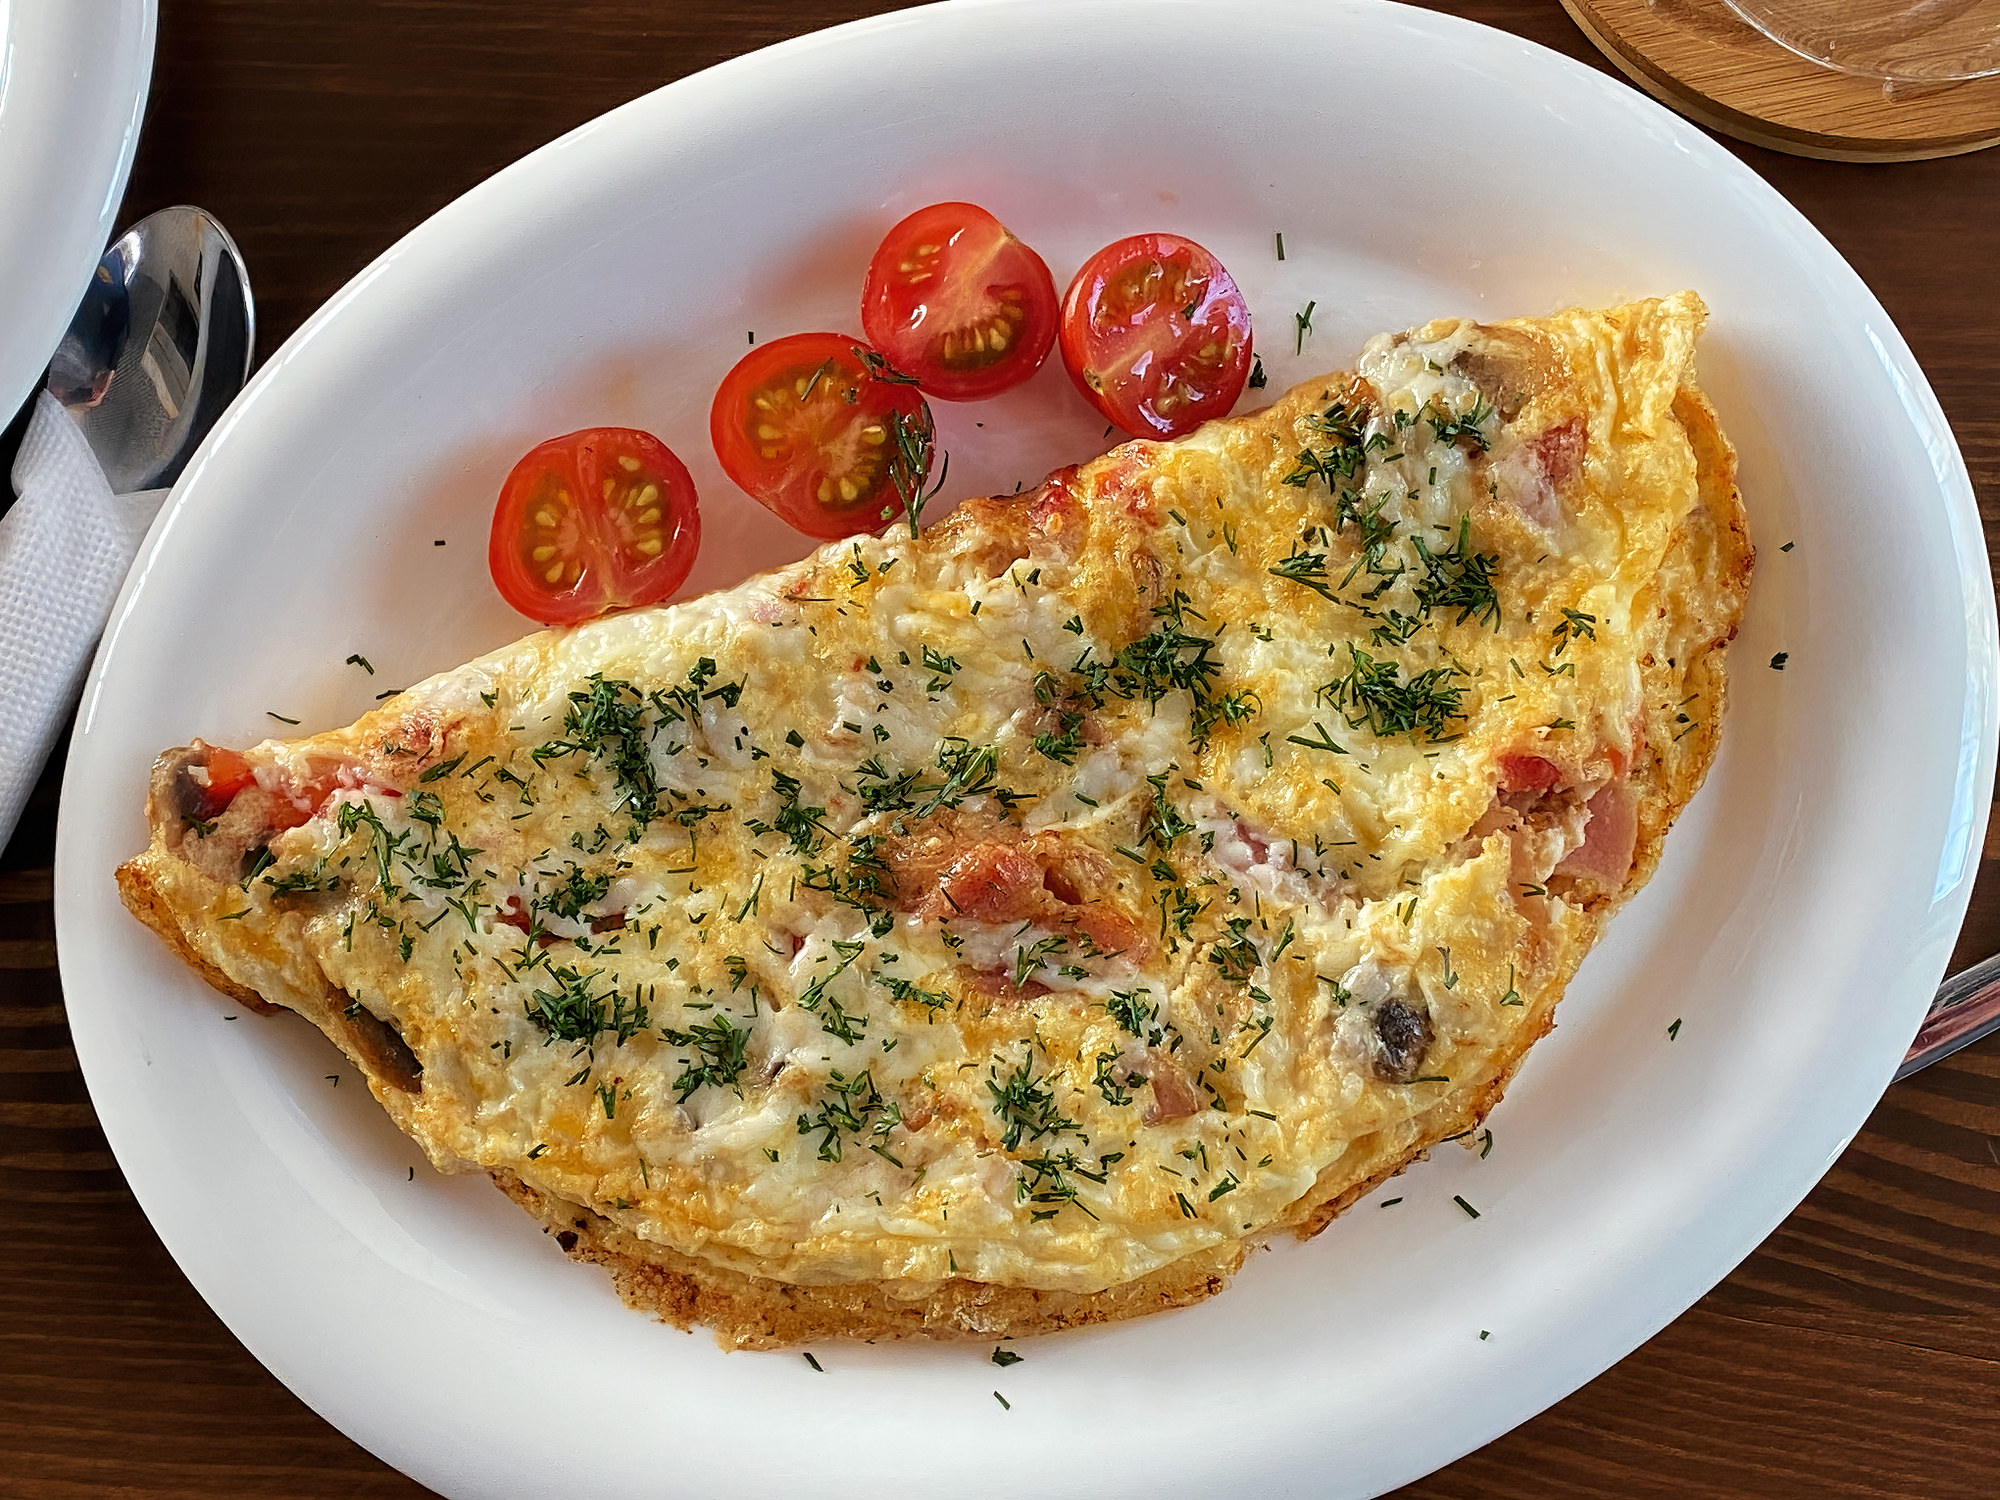 Omelet with herbs, tomatoes and mushrooms.